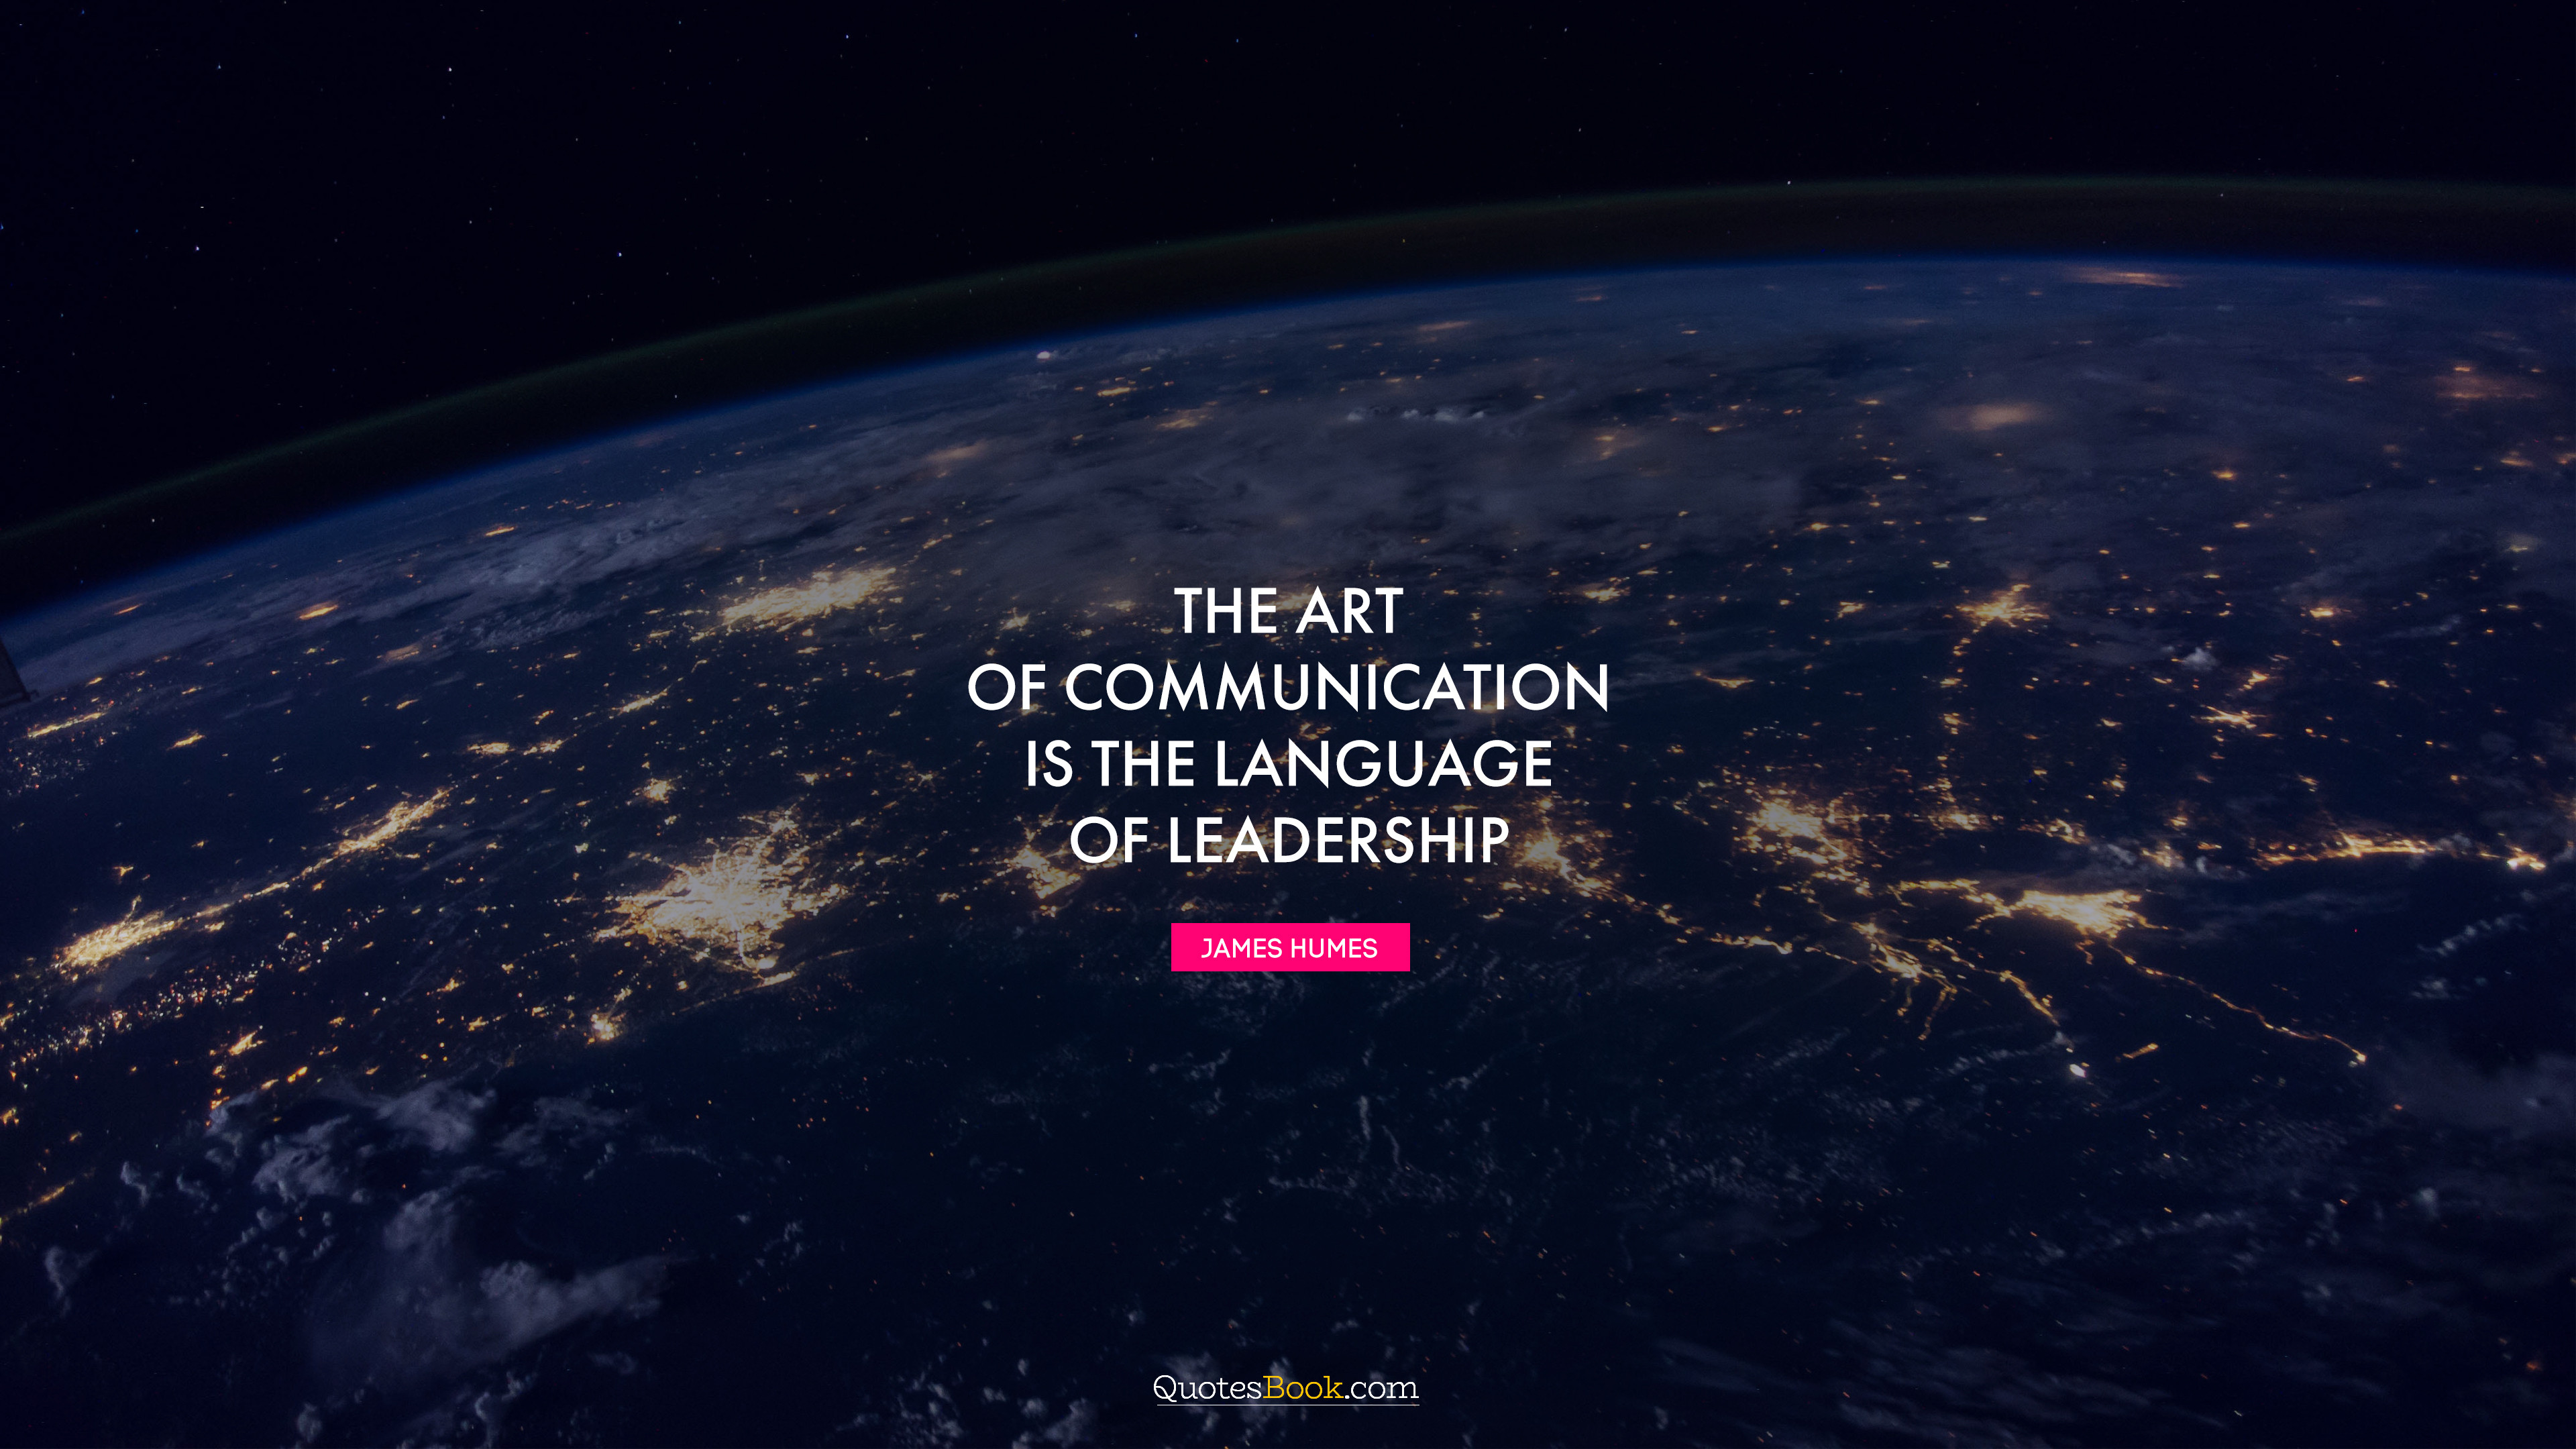 The art of communication is the language of leadership. - Quote by